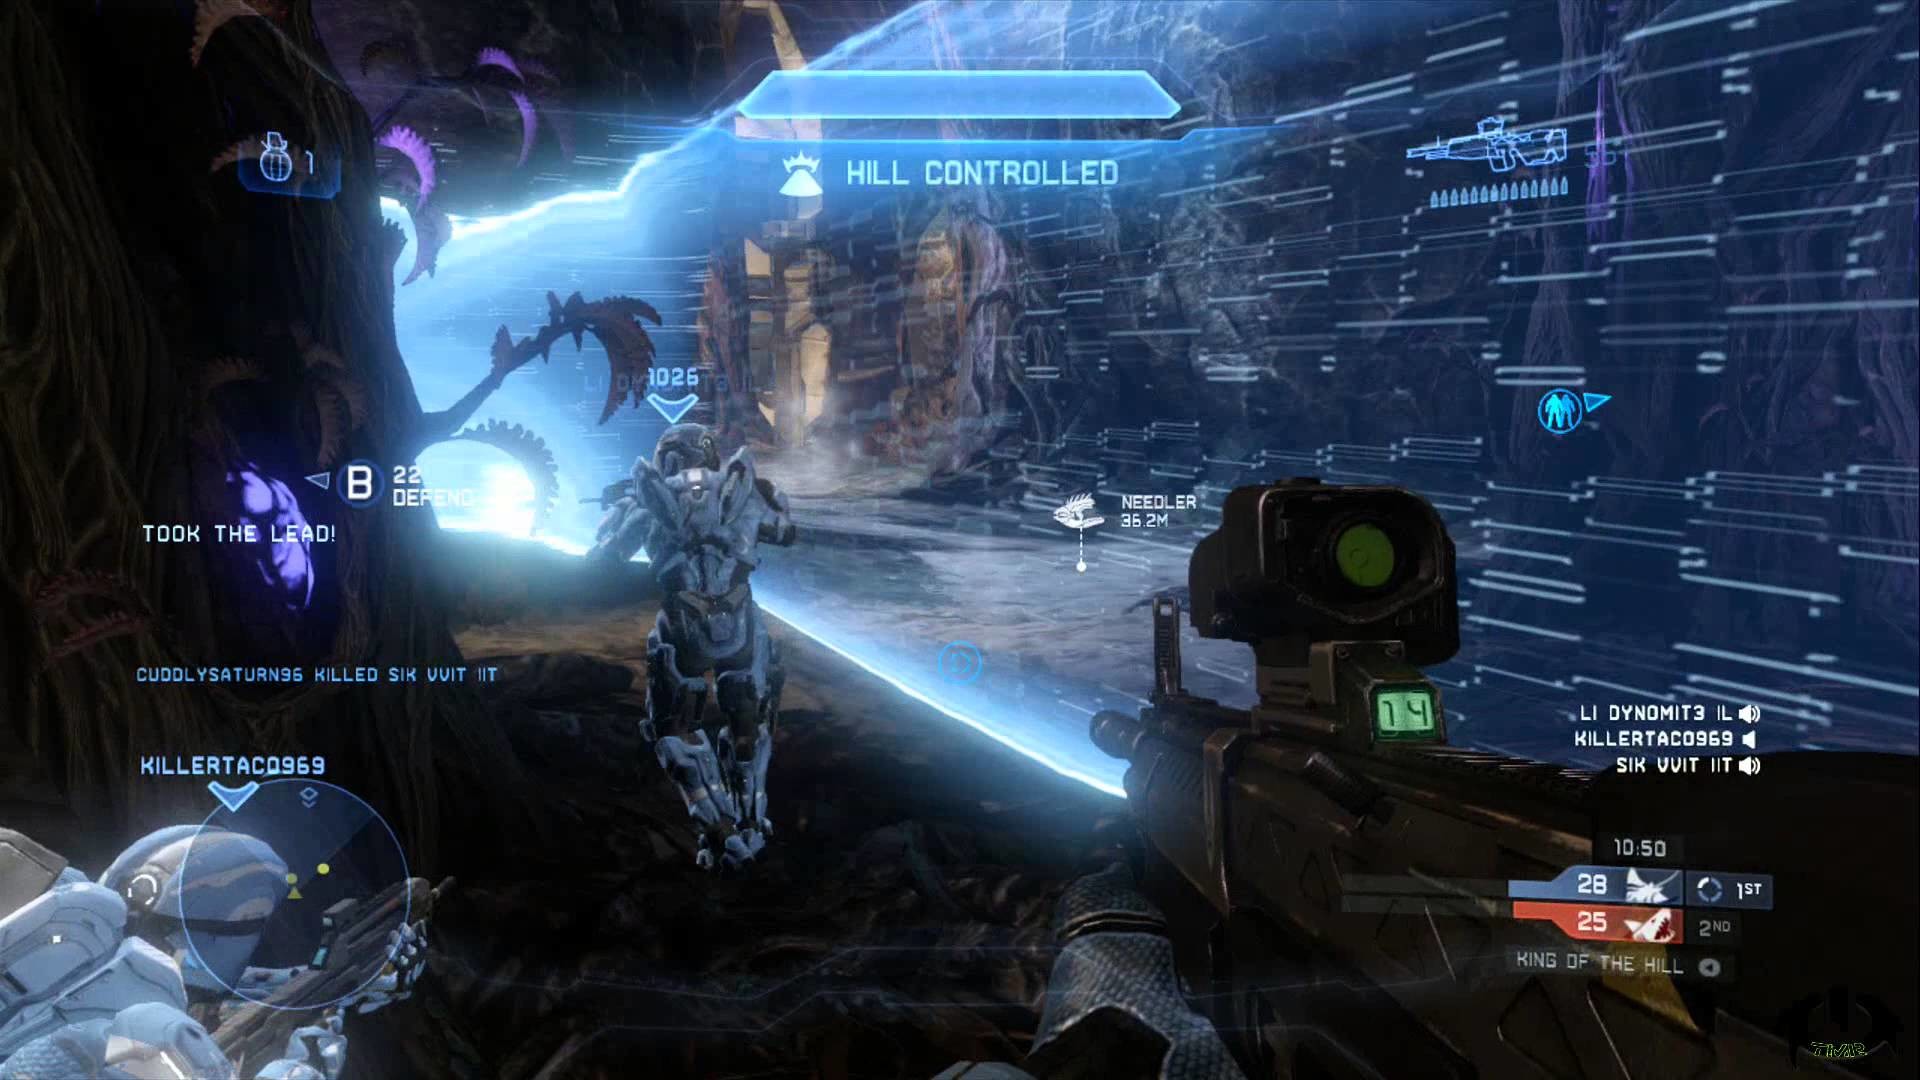 1920x1080 Displaying 19> Images For - Halo 4 Multiplayer Wallpaper 1080p.